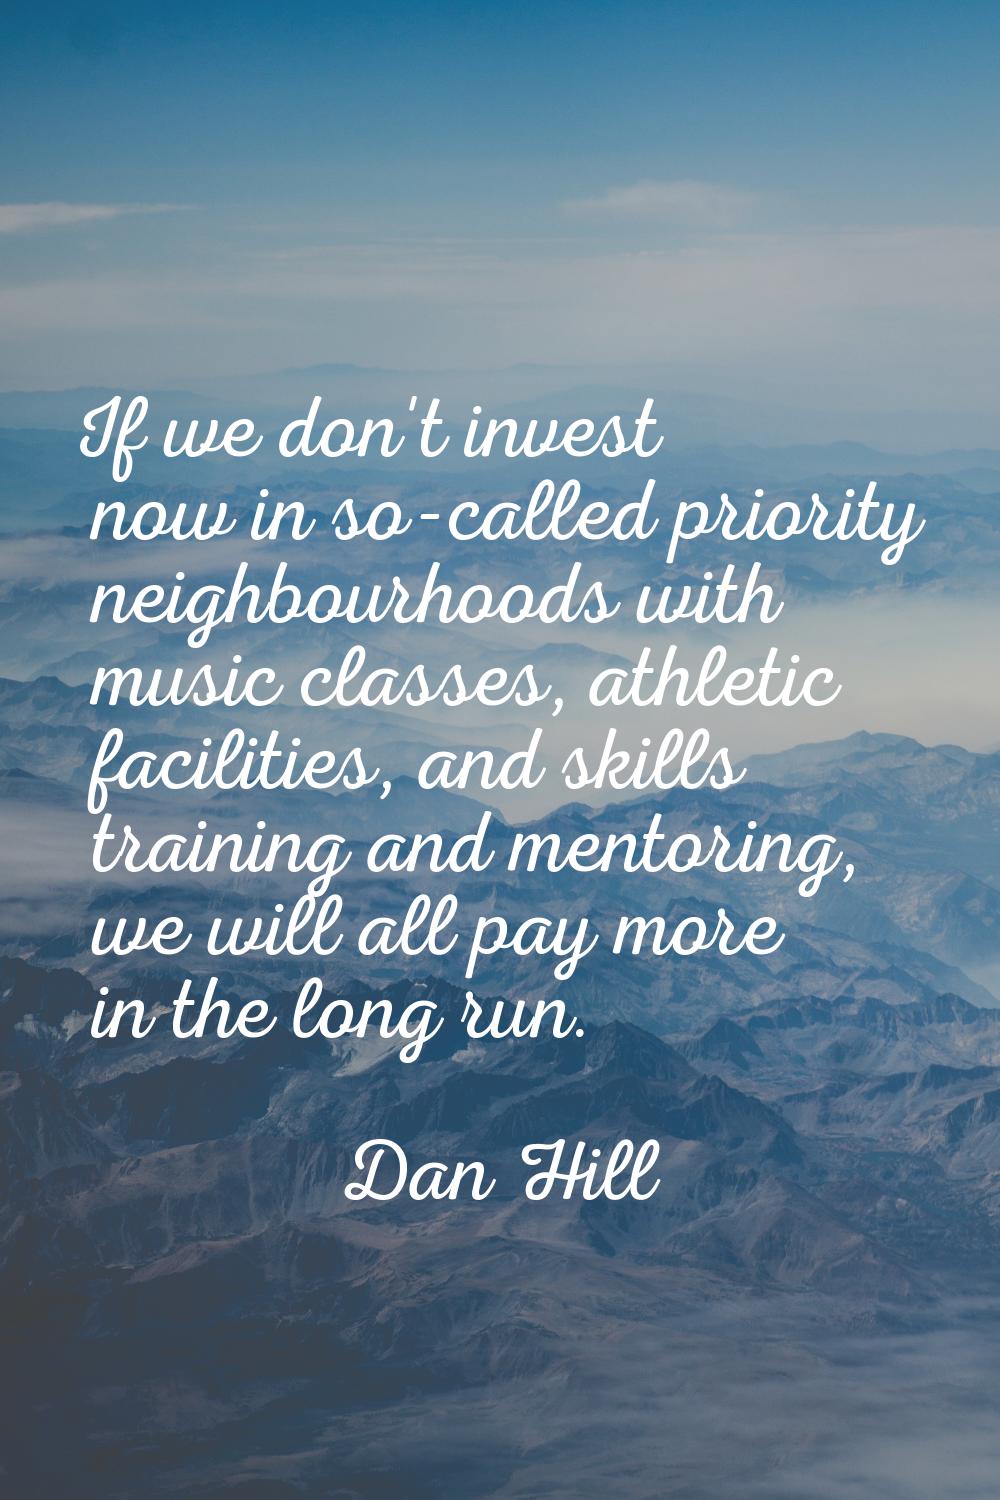 If we don't invest now in so-called priority neighbourhoods with music classes, athletic facilities